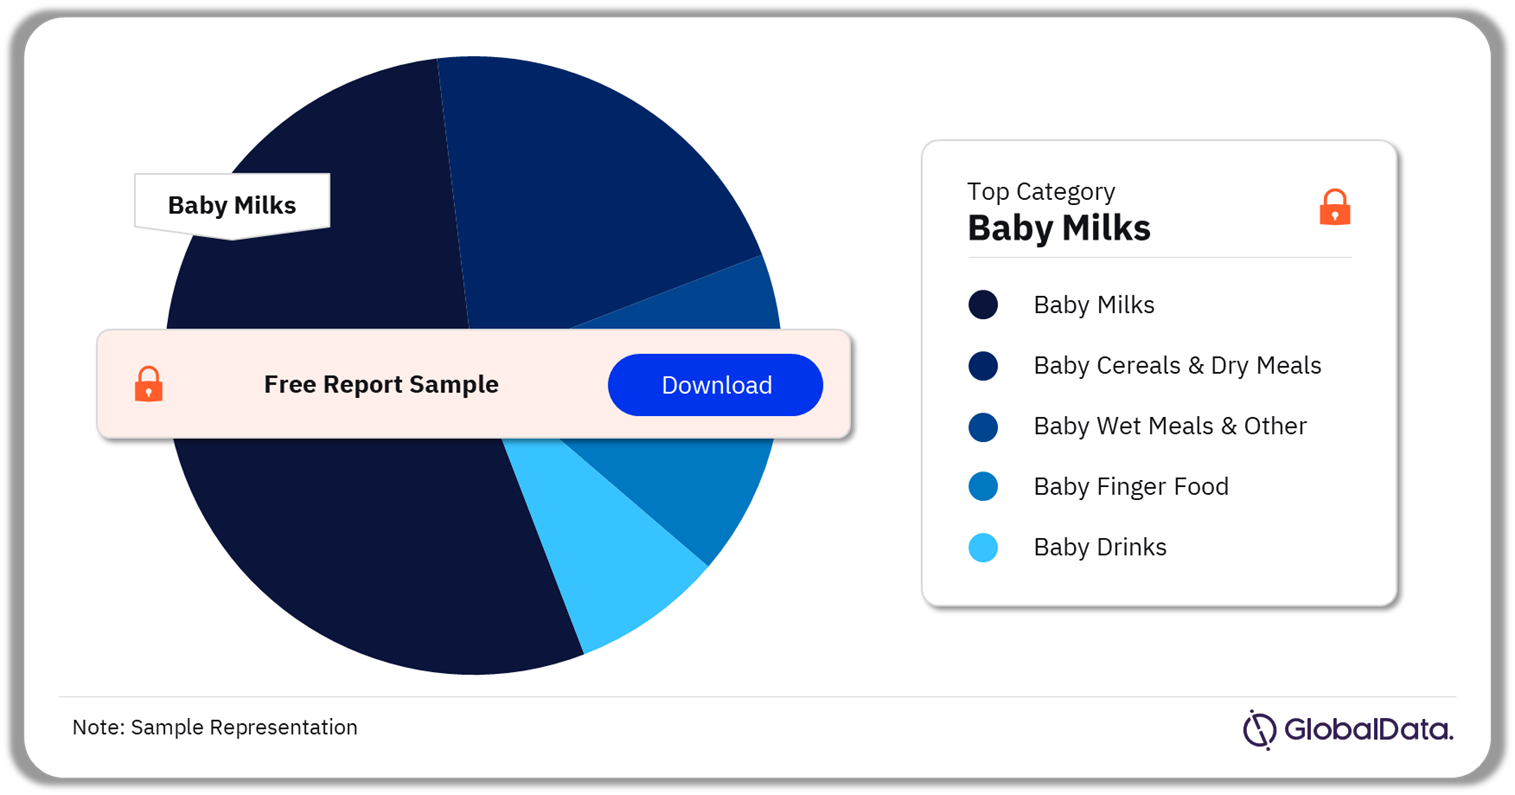 Baby milk category held the largest Israel baby food market share in 2021